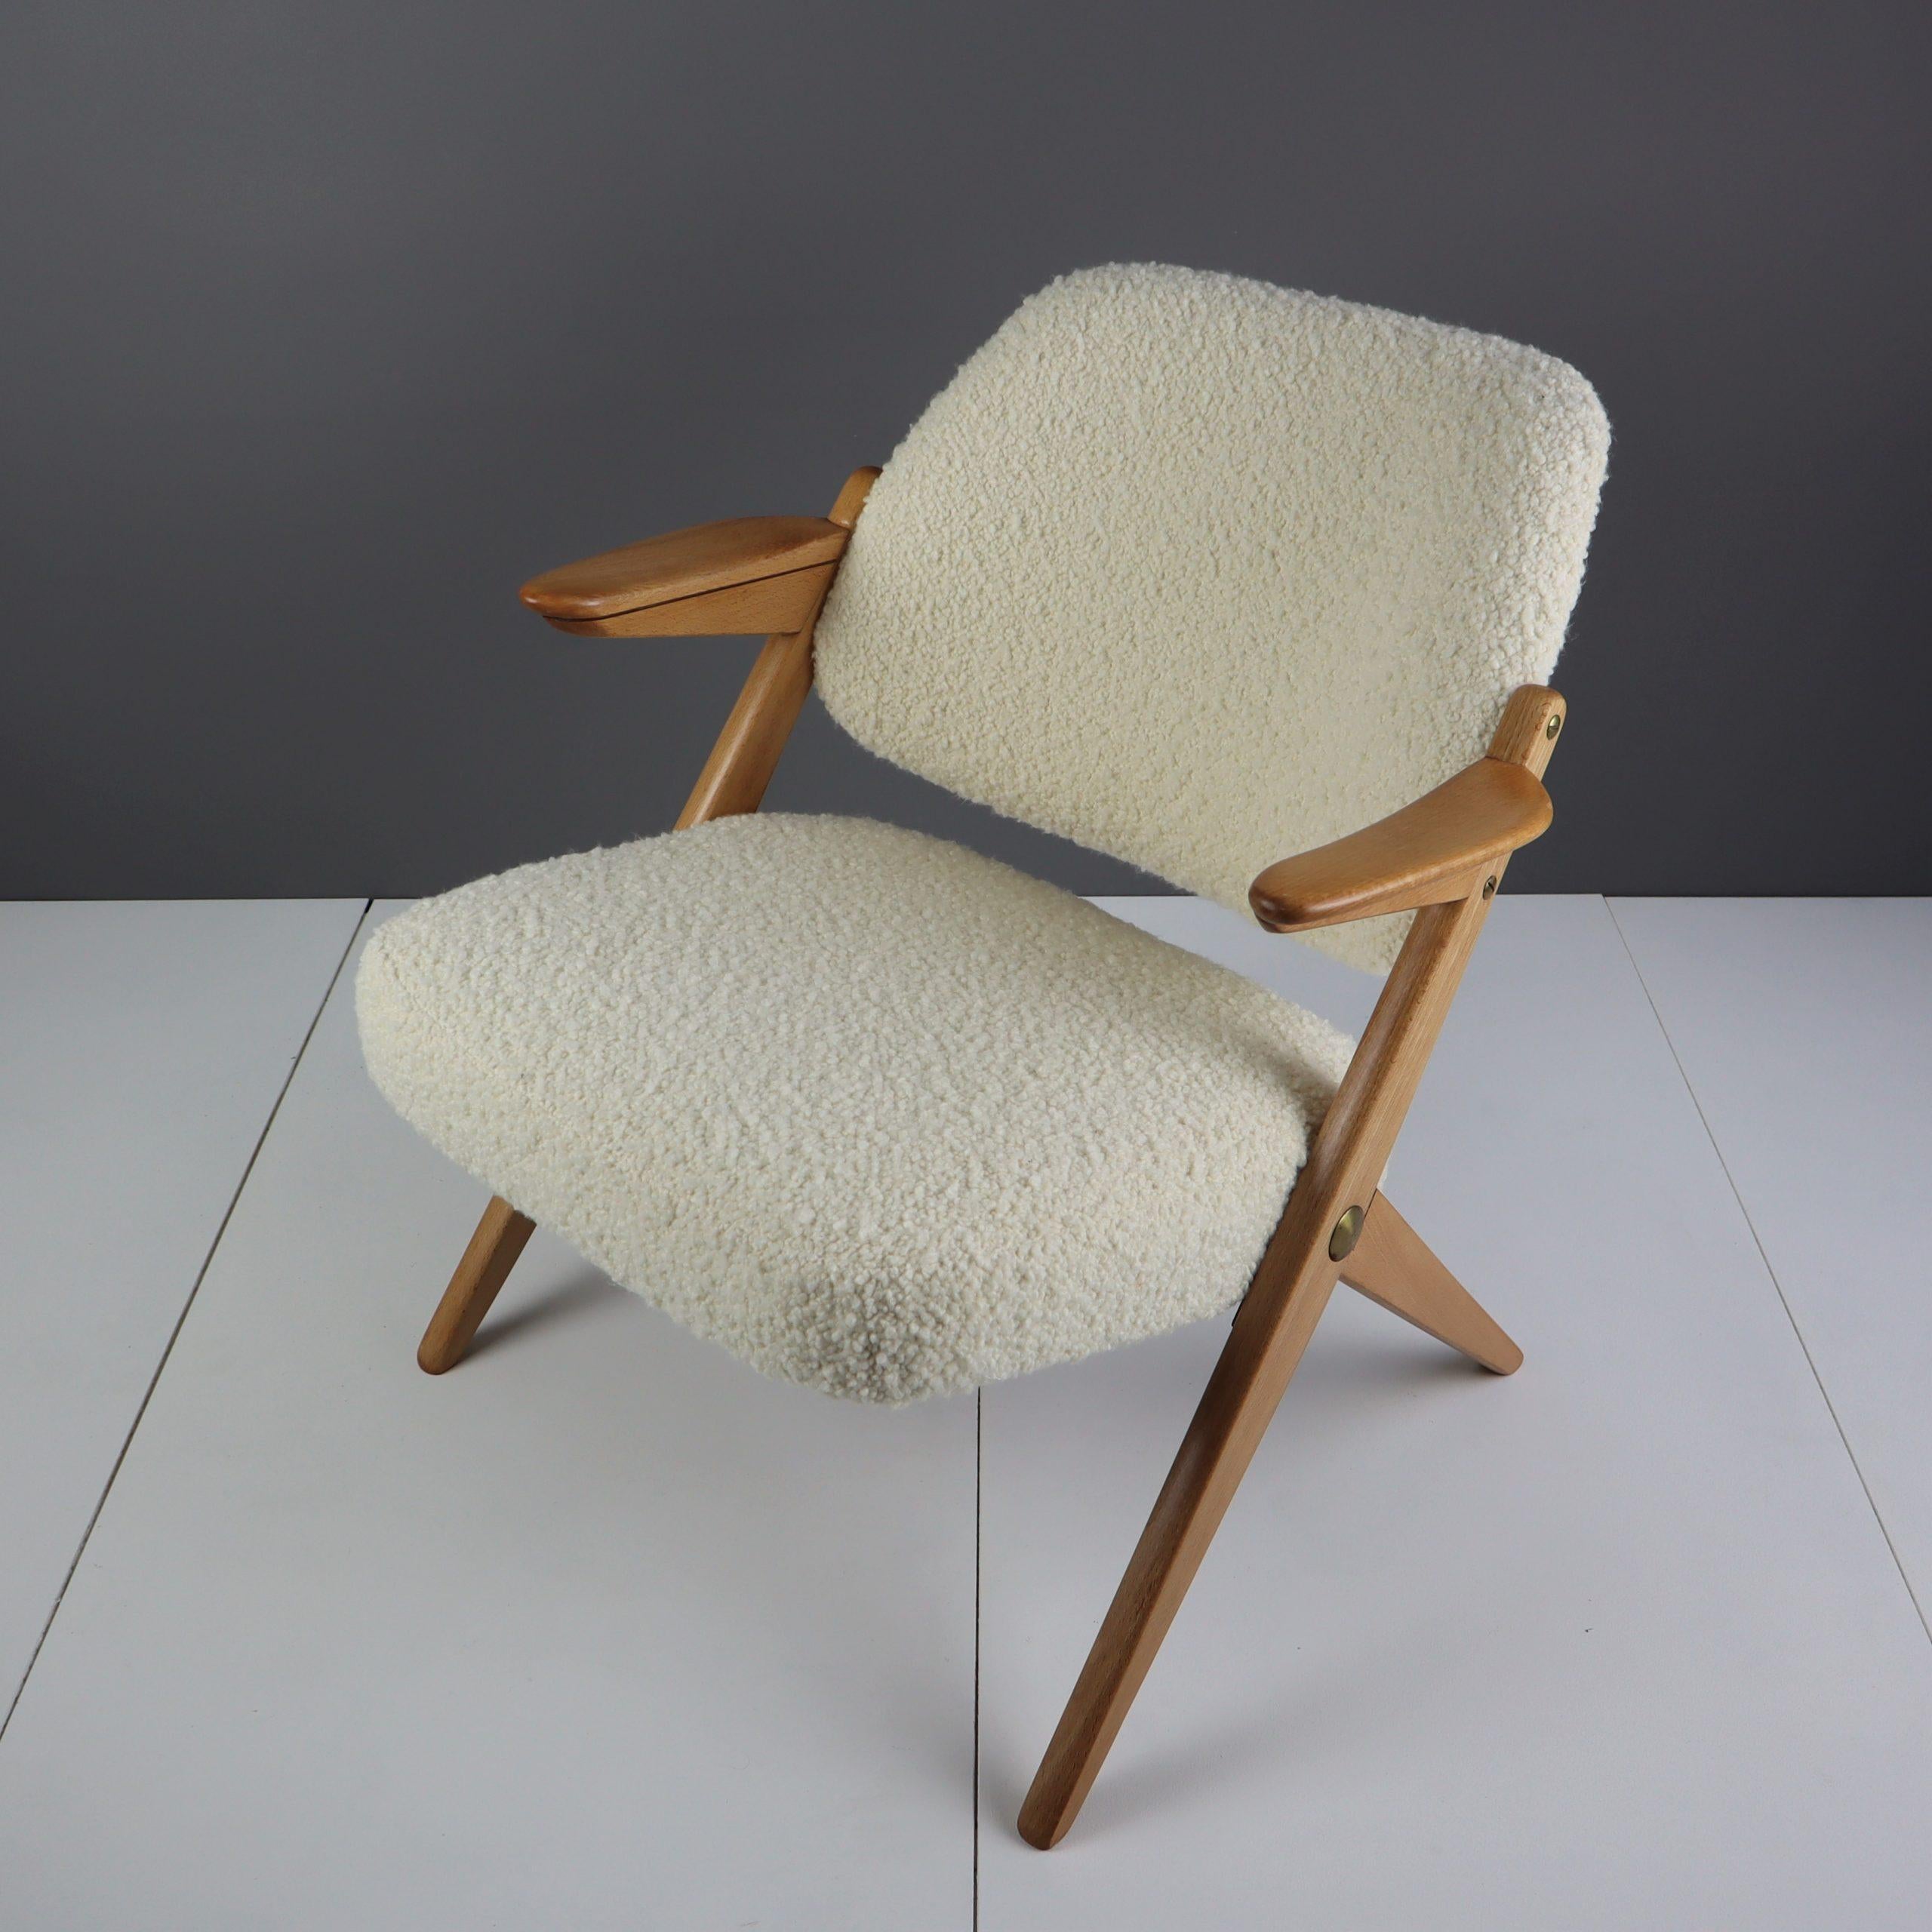 A rare Bengt Ruda midcentury beech armchair reupholstered with an Italian off-white bouclé fabric from Designers Guild’s Lana collection.

We bought this chair in July 2022 at an auction in Sundsvall, Sweden. We have a penchant for midcentury